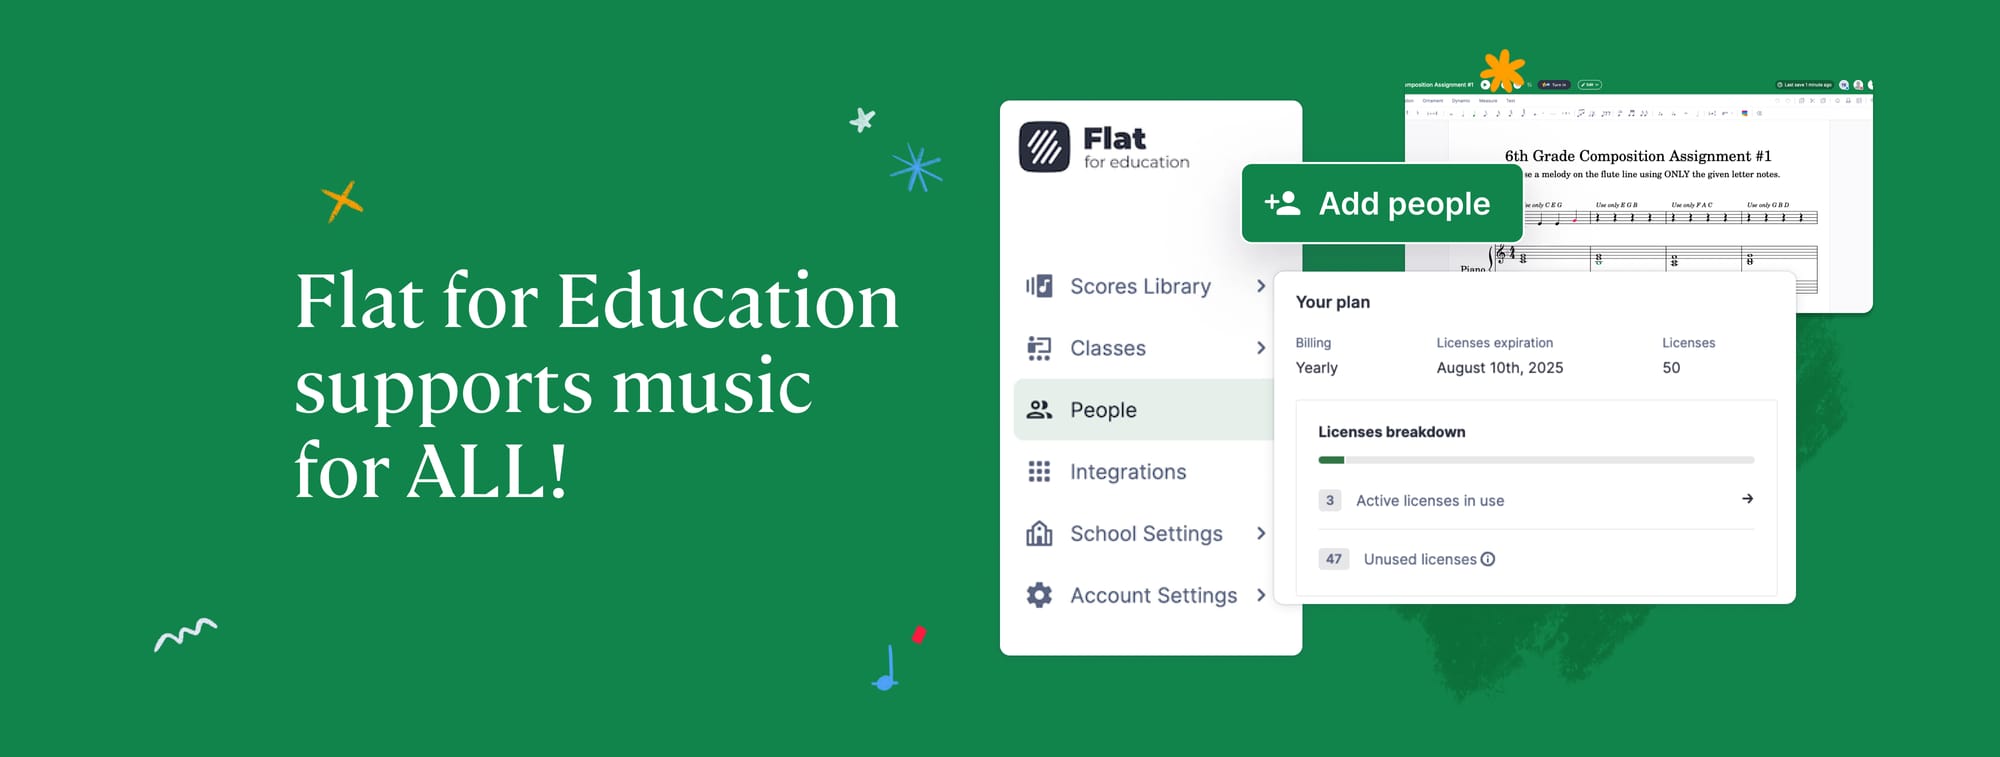 Flat for Education supports music for ALL!